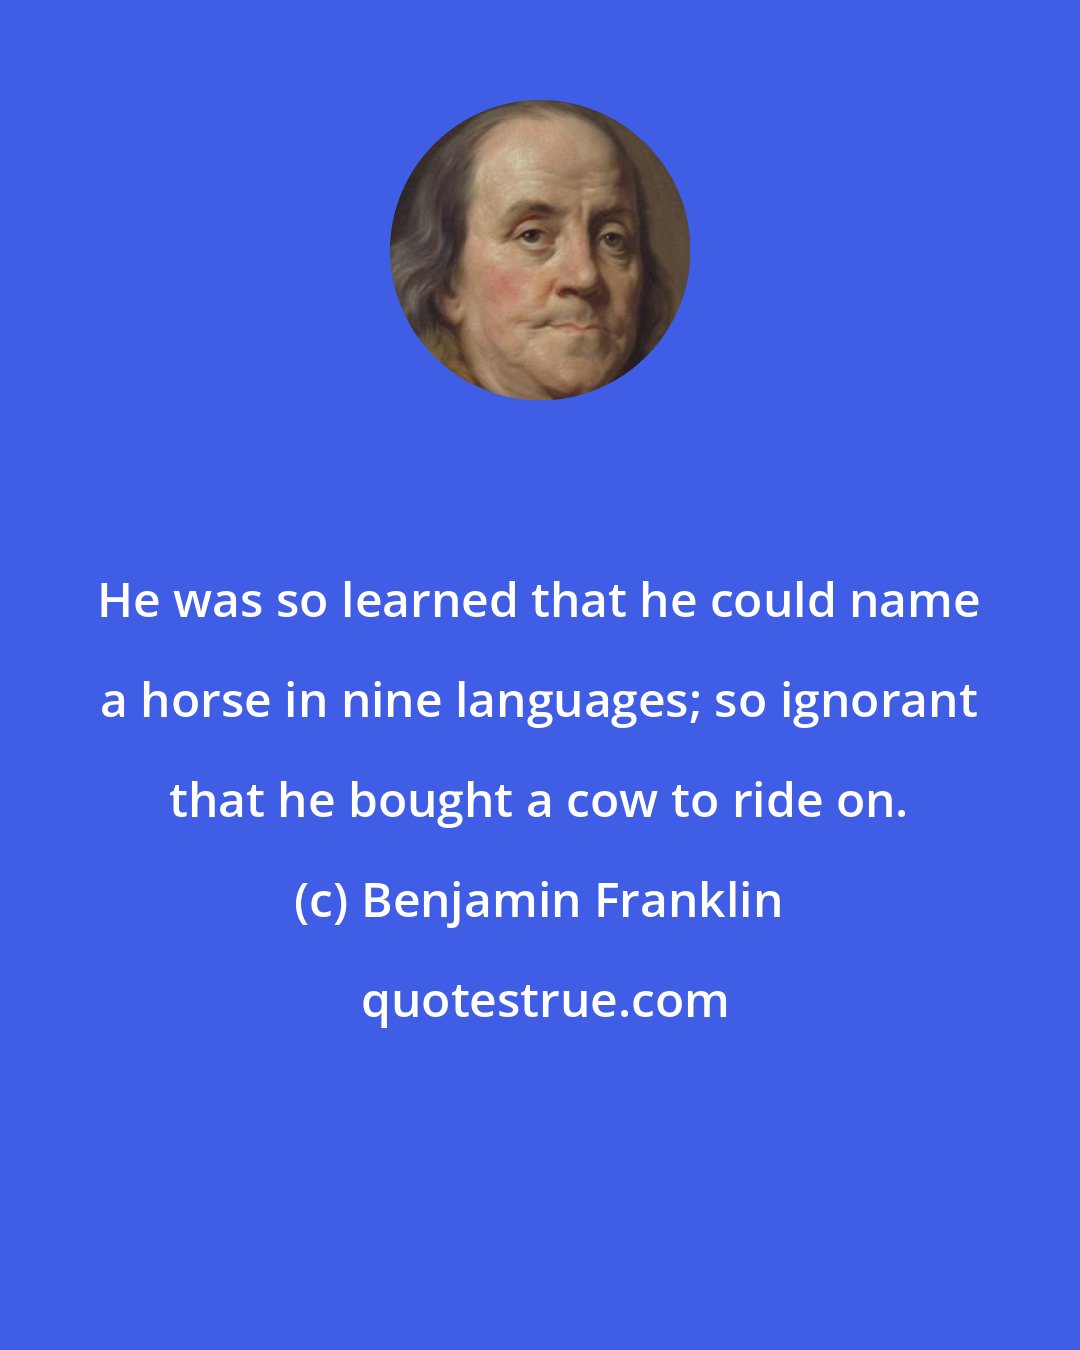 Benjamin Franklin: He was so learned that he could name a horse in nine languages; so ignorant that he bought a cow to ride on.